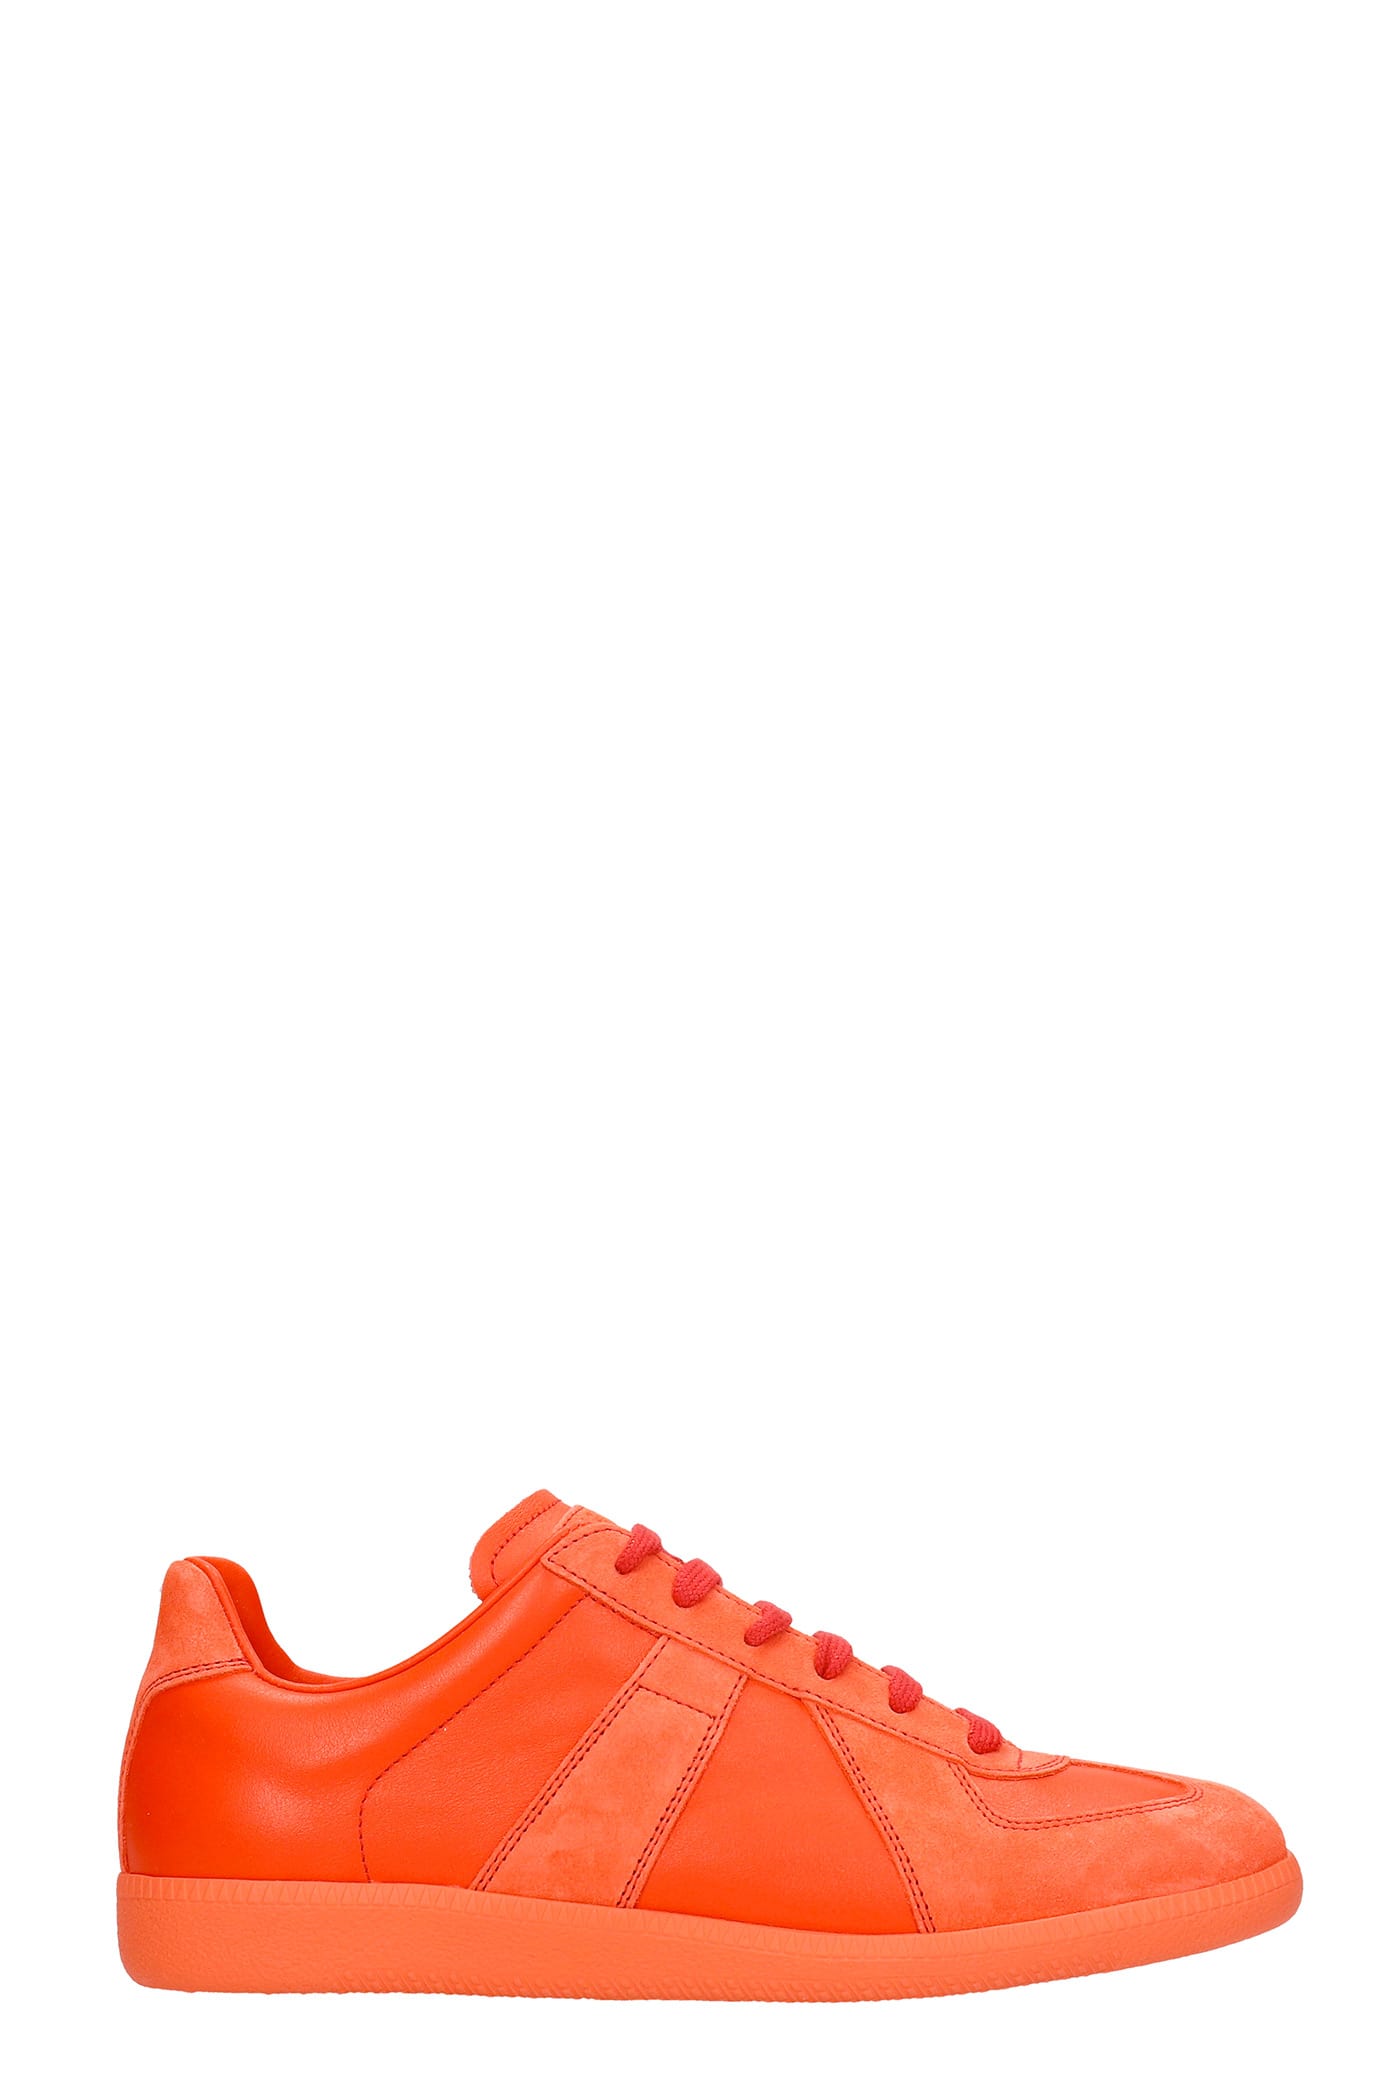 MAISON MARGIELA REPLICA SNEAKERS IN ORANGE SUEDE AND LEATHER,S57WS0236P1897H8678